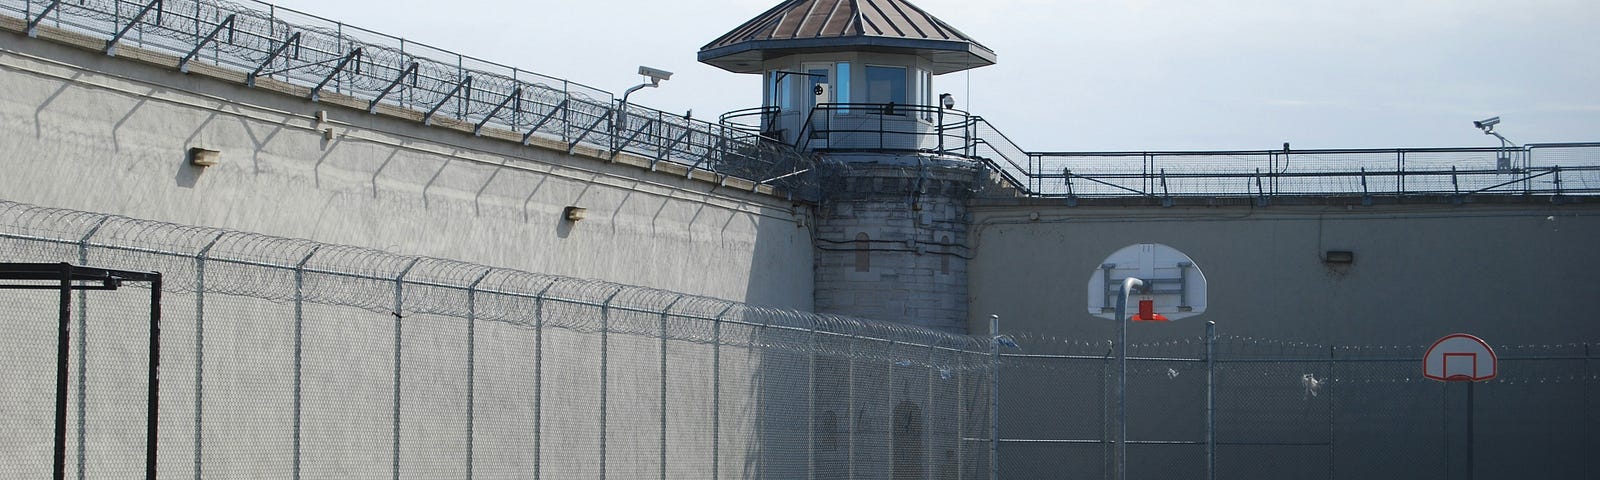 Picture of a prison yard, with fences and high walls that are covered by barbed wire.